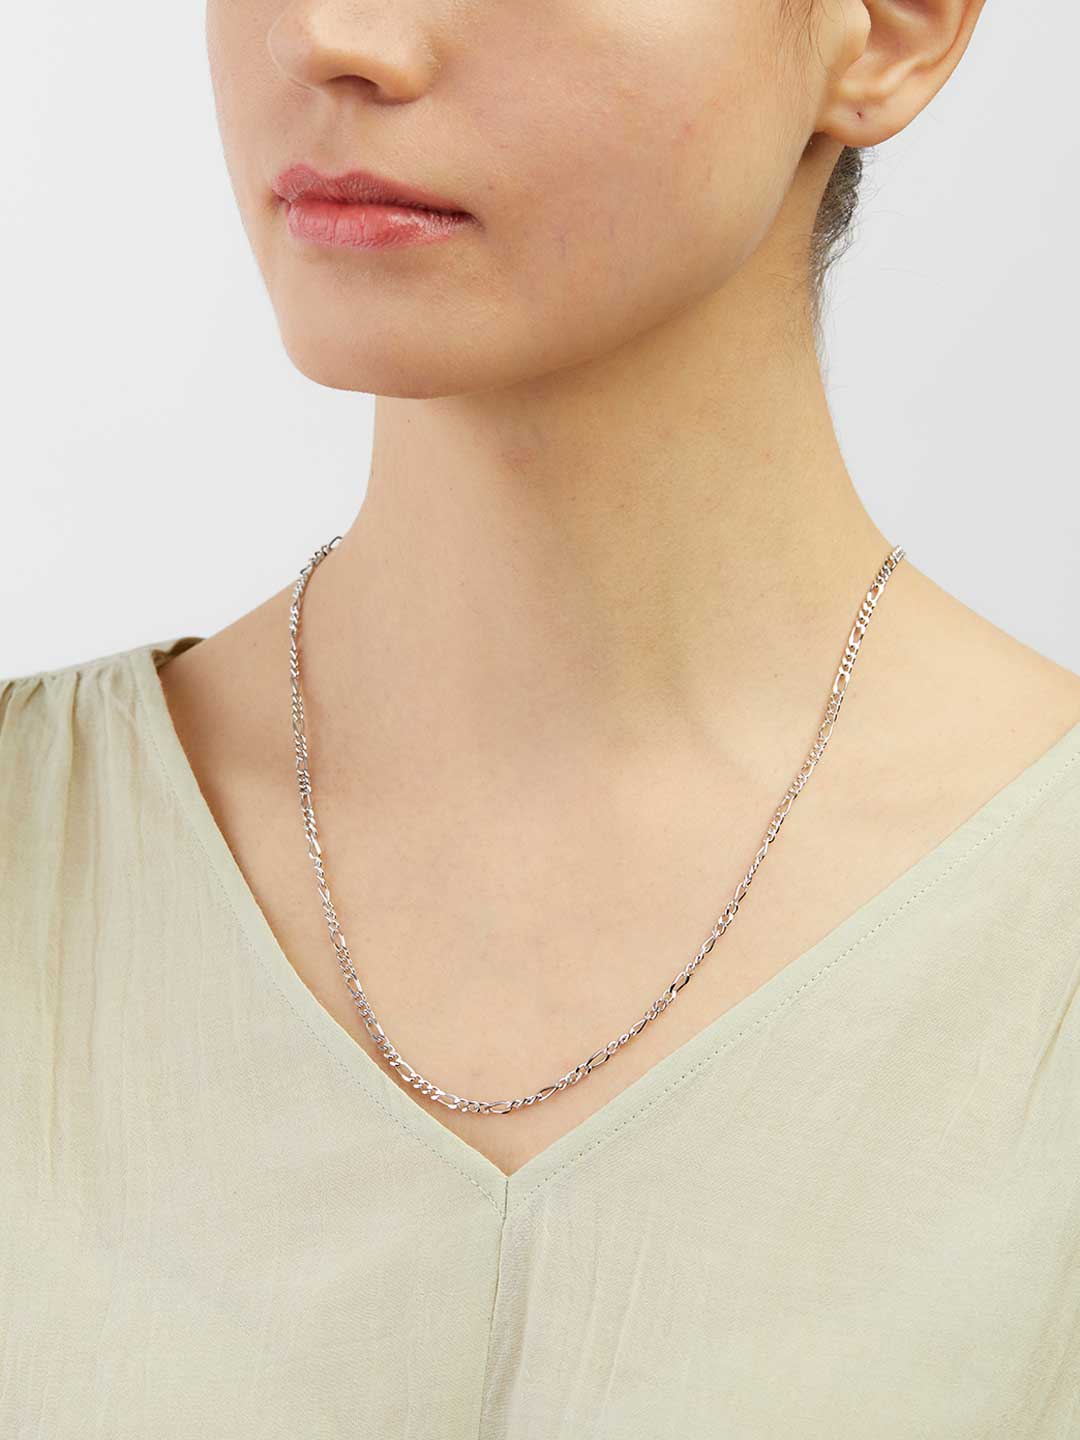 Negroni Necklace - Silver